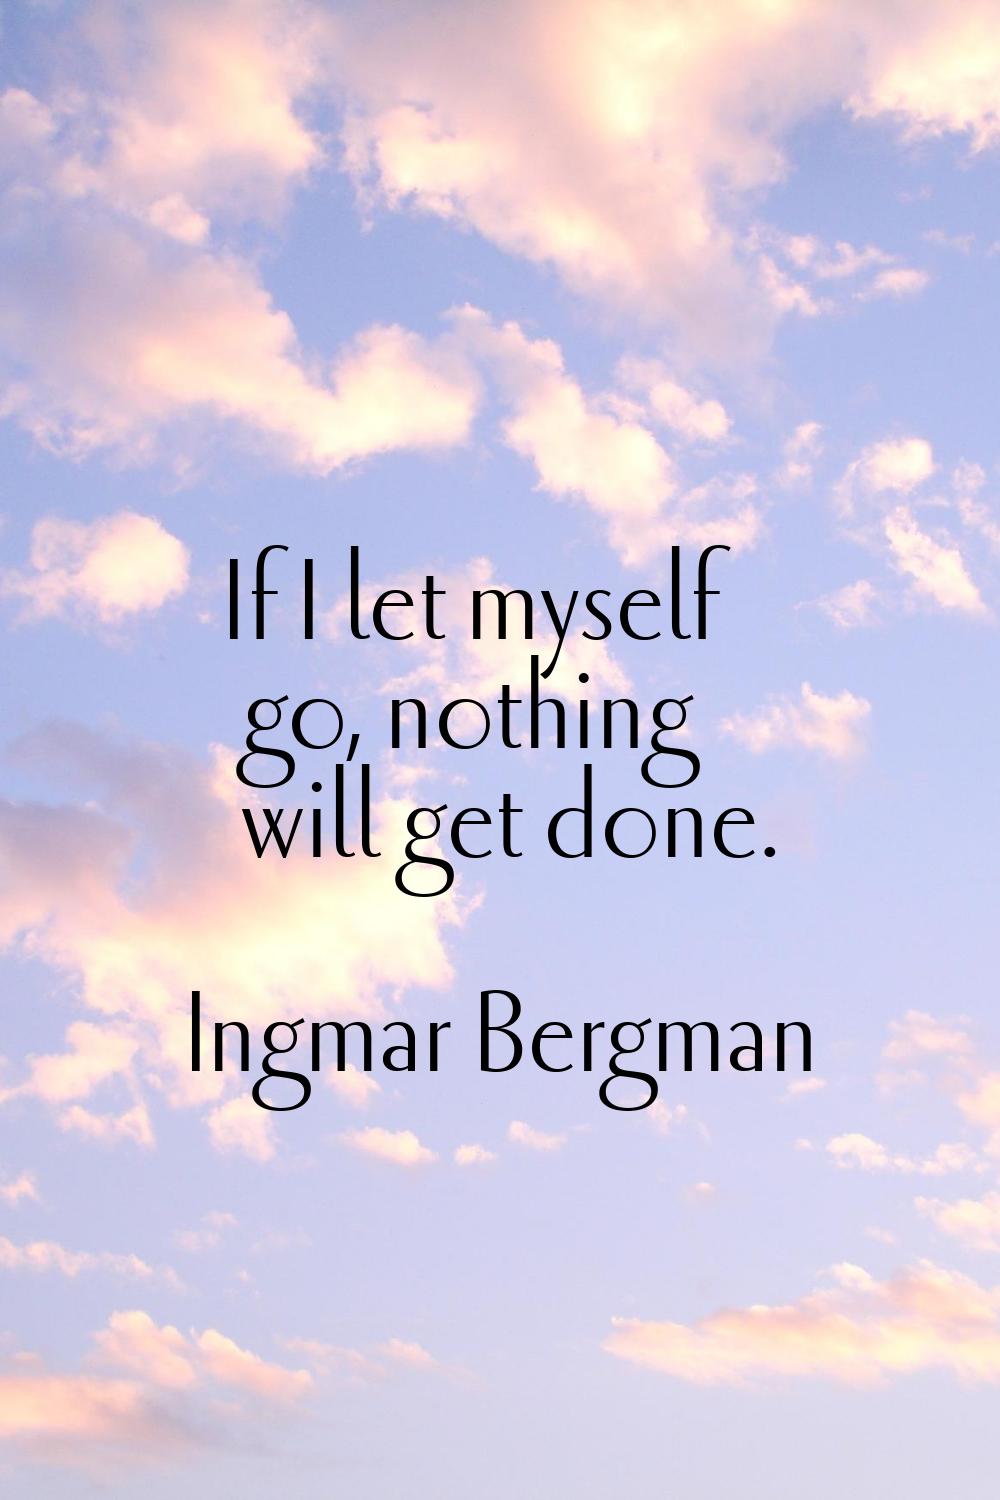 If I let myself go, nothing will get done.